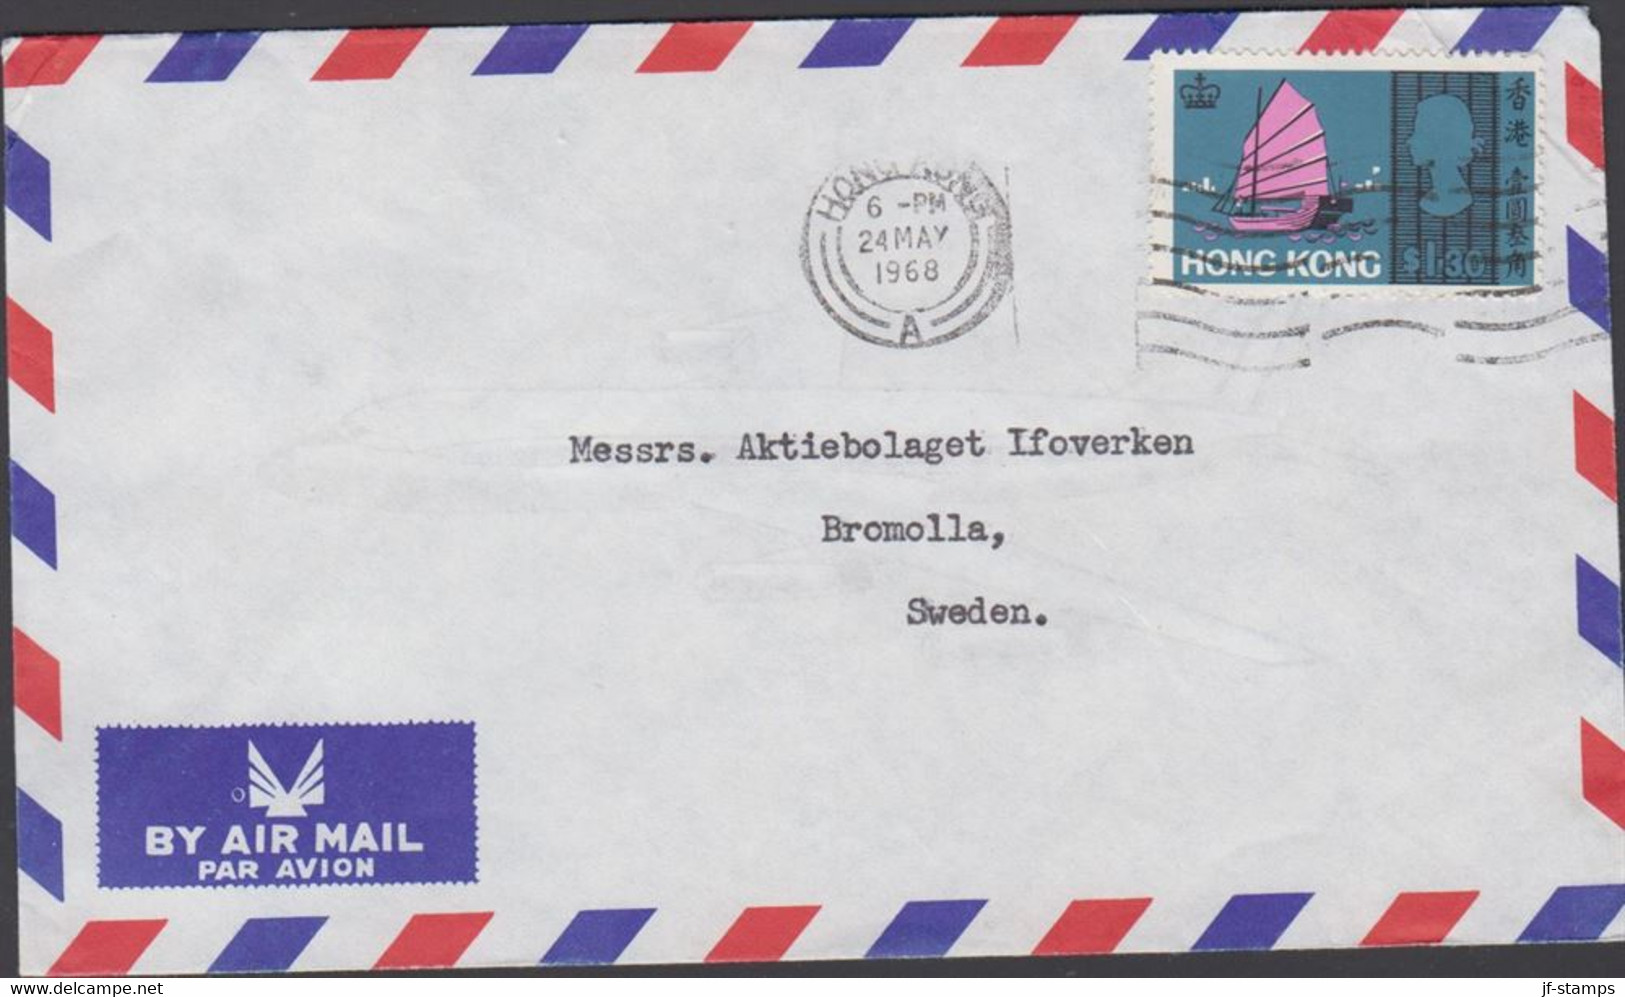 1968. HONG KONG $1.30 SHIPS On AIR MAIL Cover To Bromolla, Sweden Cancelled HONG KONG 24 MAY ... (Michel 237) - JF427093 - Lettres & Documents